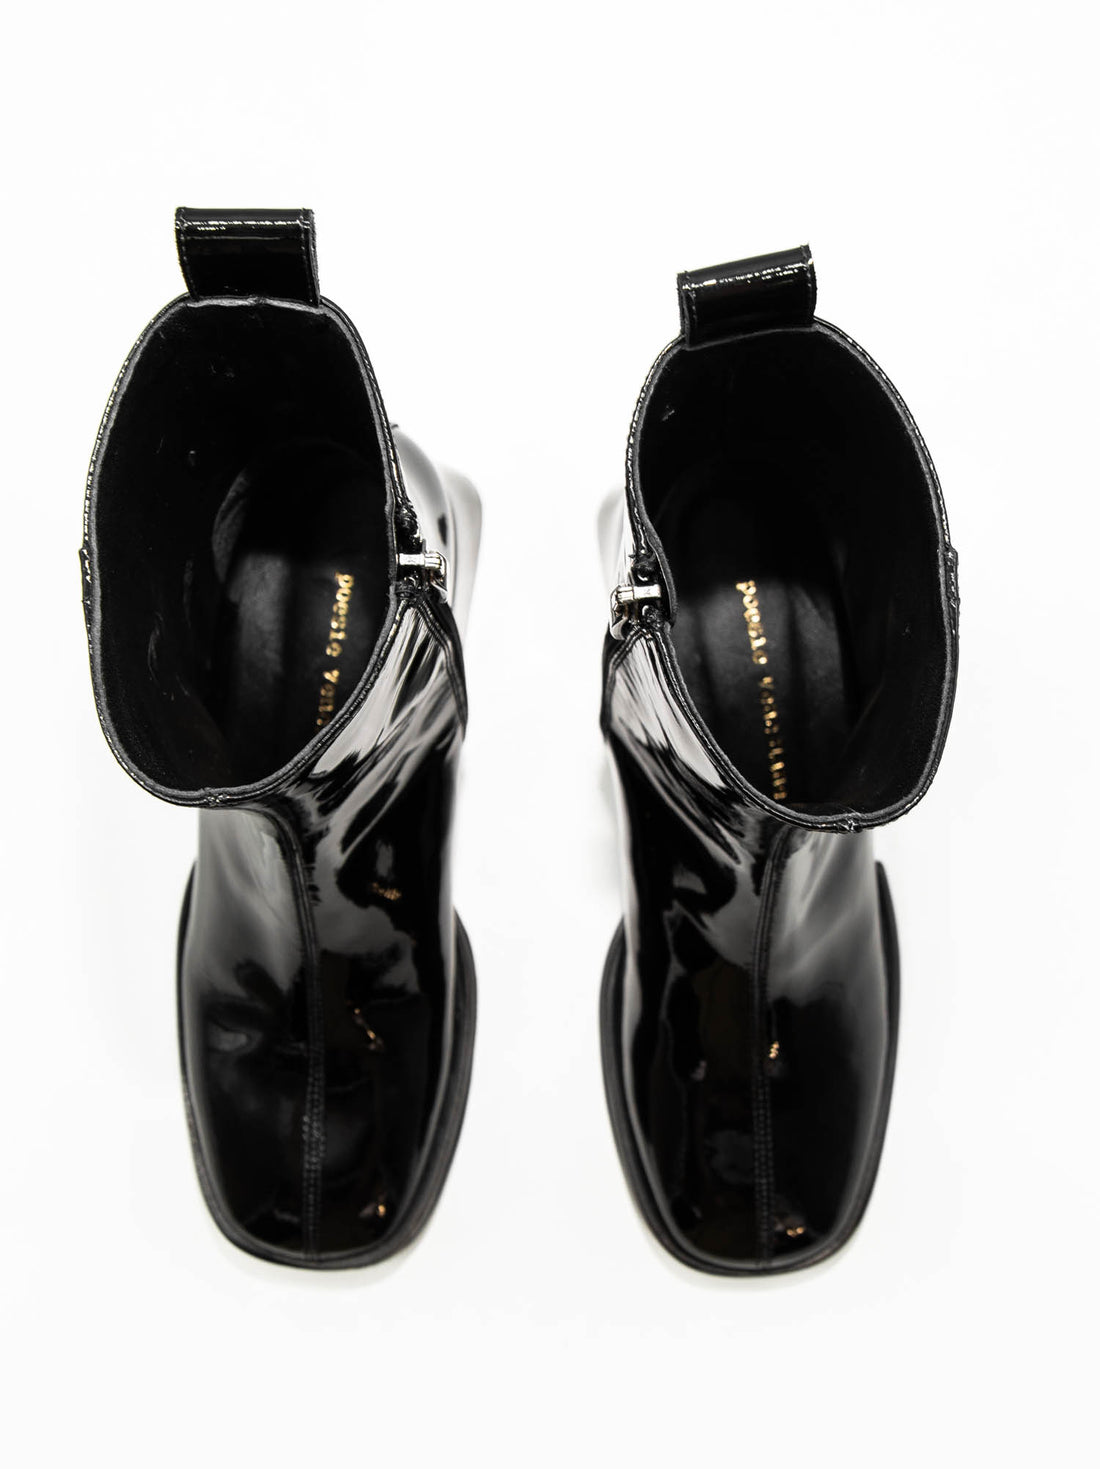 MISV08 PATENT LEATHER HEEL ANKLE BOOTS